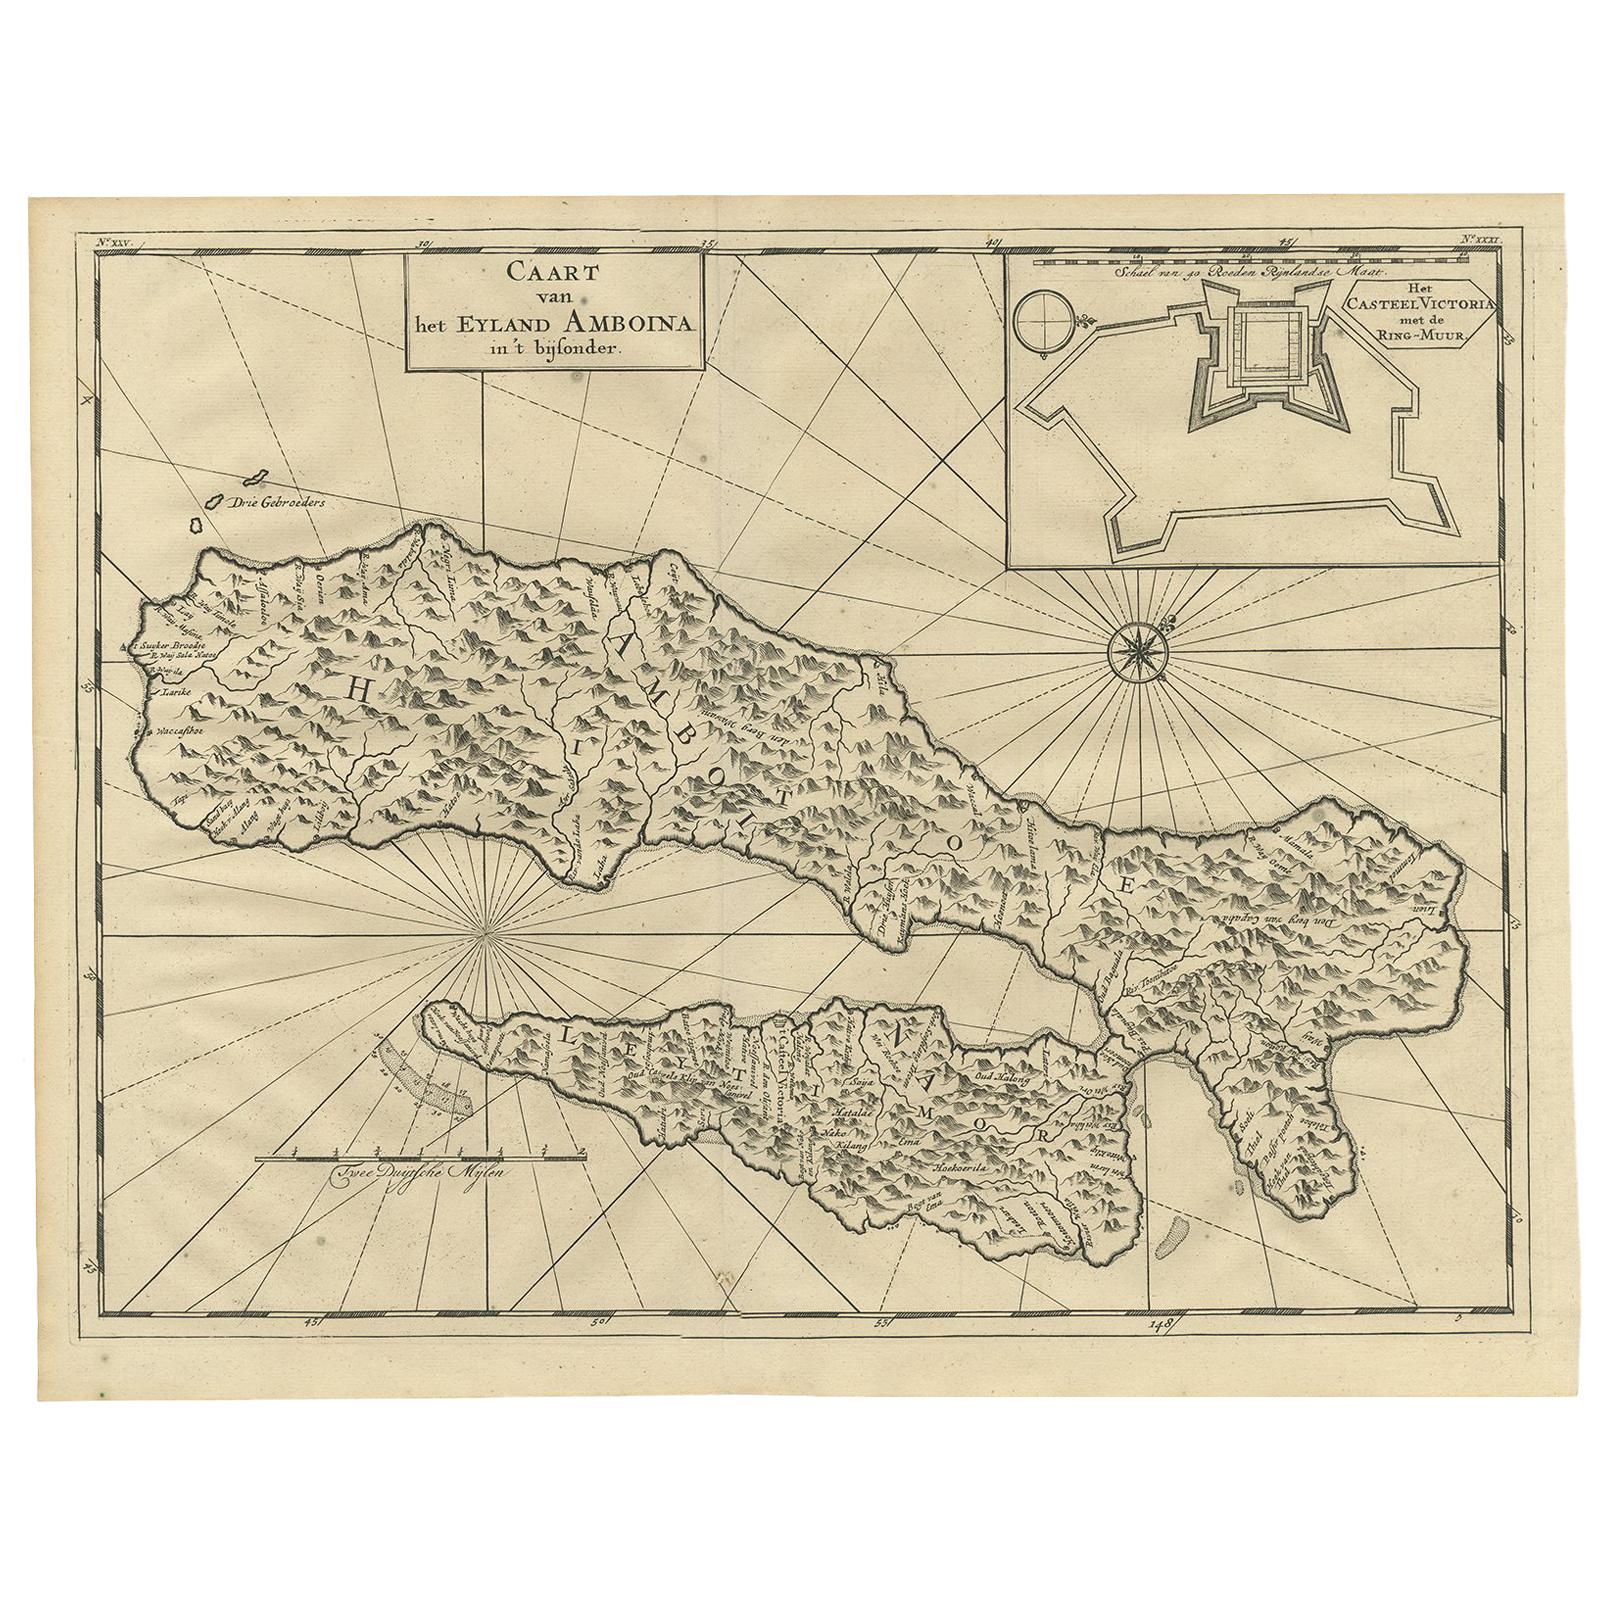 Antique Map of Ambon Island by Valentijn, 1726